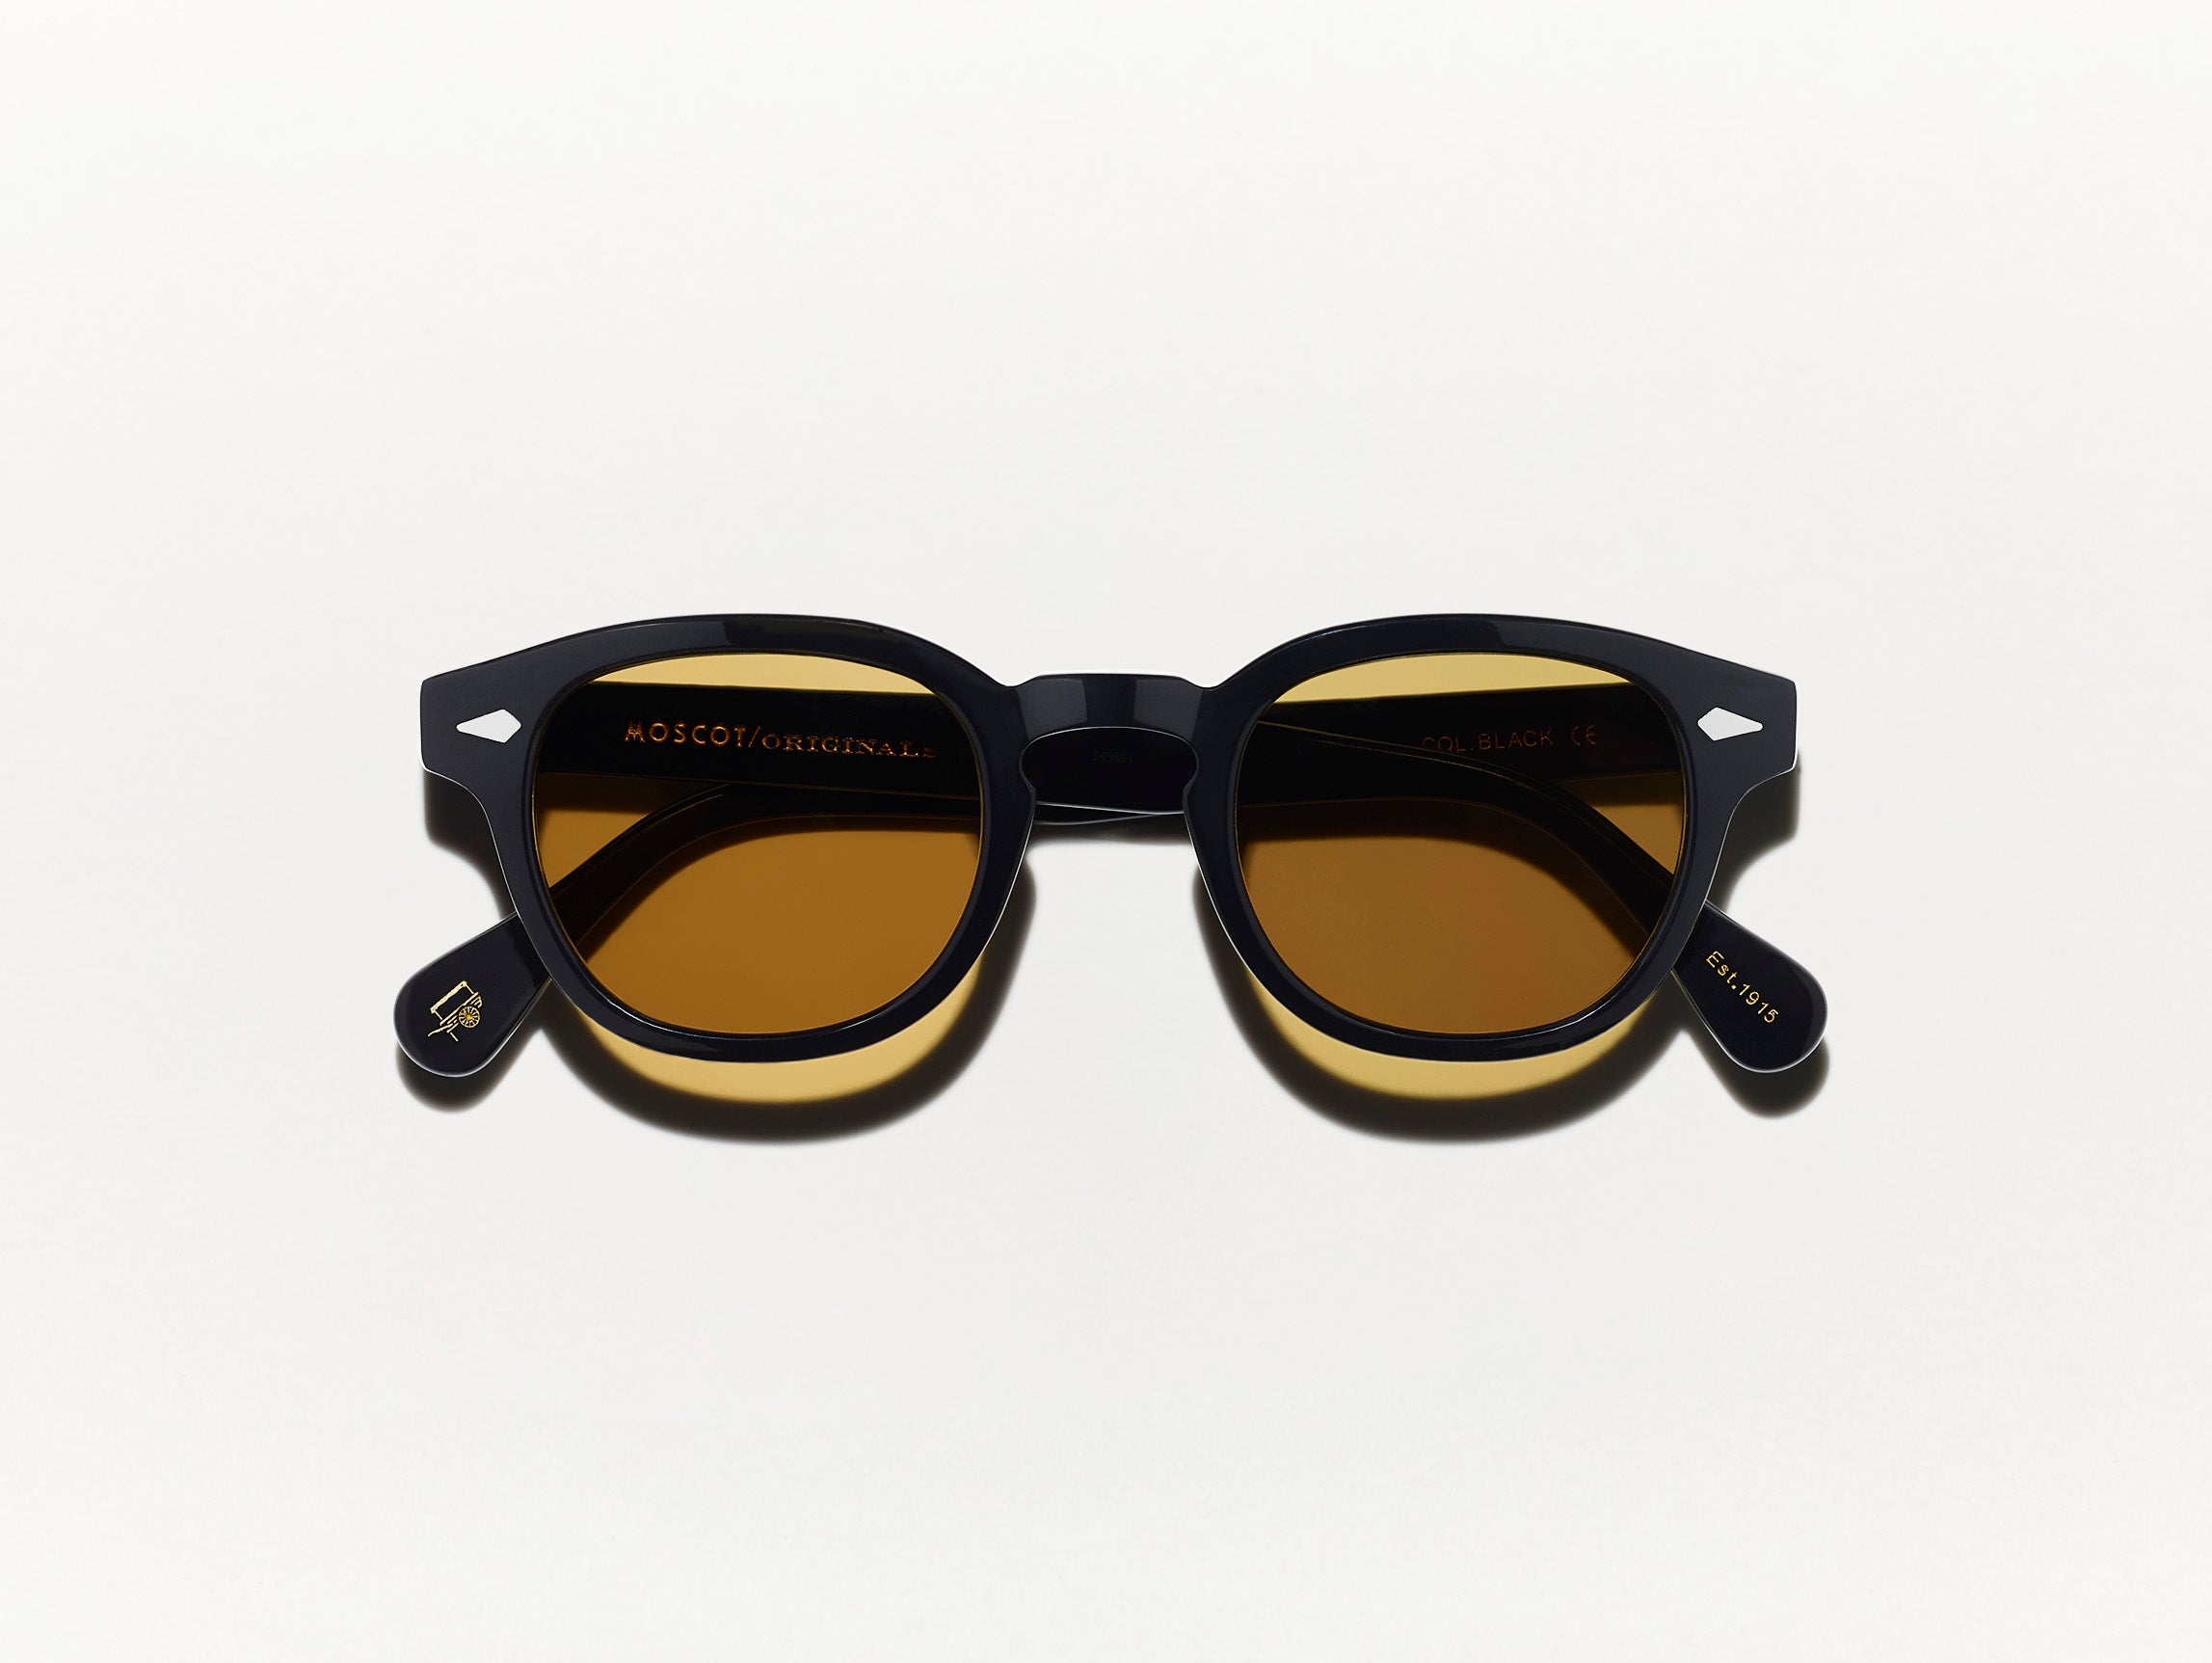 #color_amber | The LEMTOSH Black with Amber Tinted Lenses